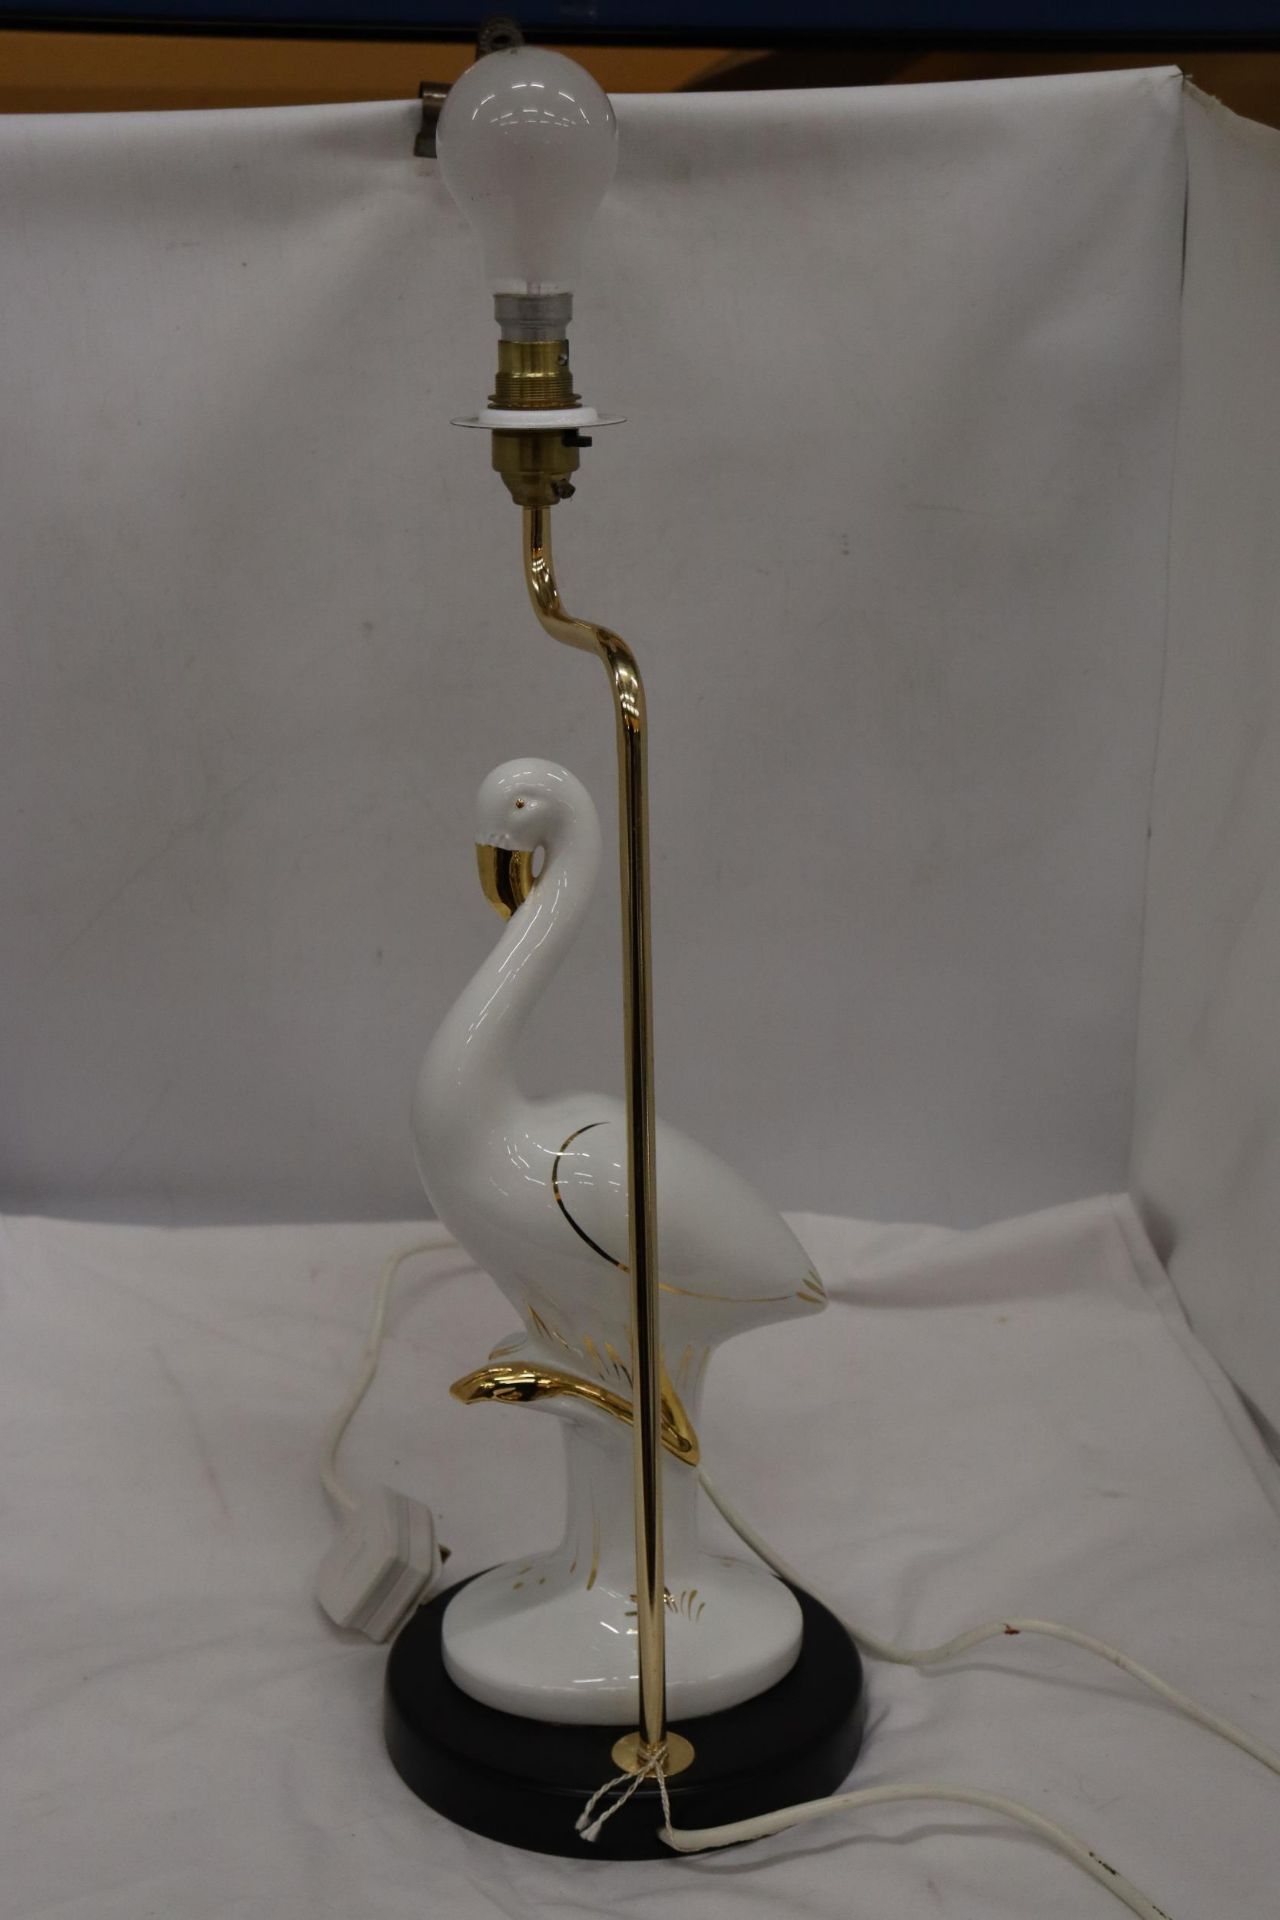 A CERAMIC WHITE AND GOLD STORK LAMP, WORKING AT TIME OF CATALOGUING, NO WARRANTY GIVEN, HEIGHT 47CM - Image 5 of 7